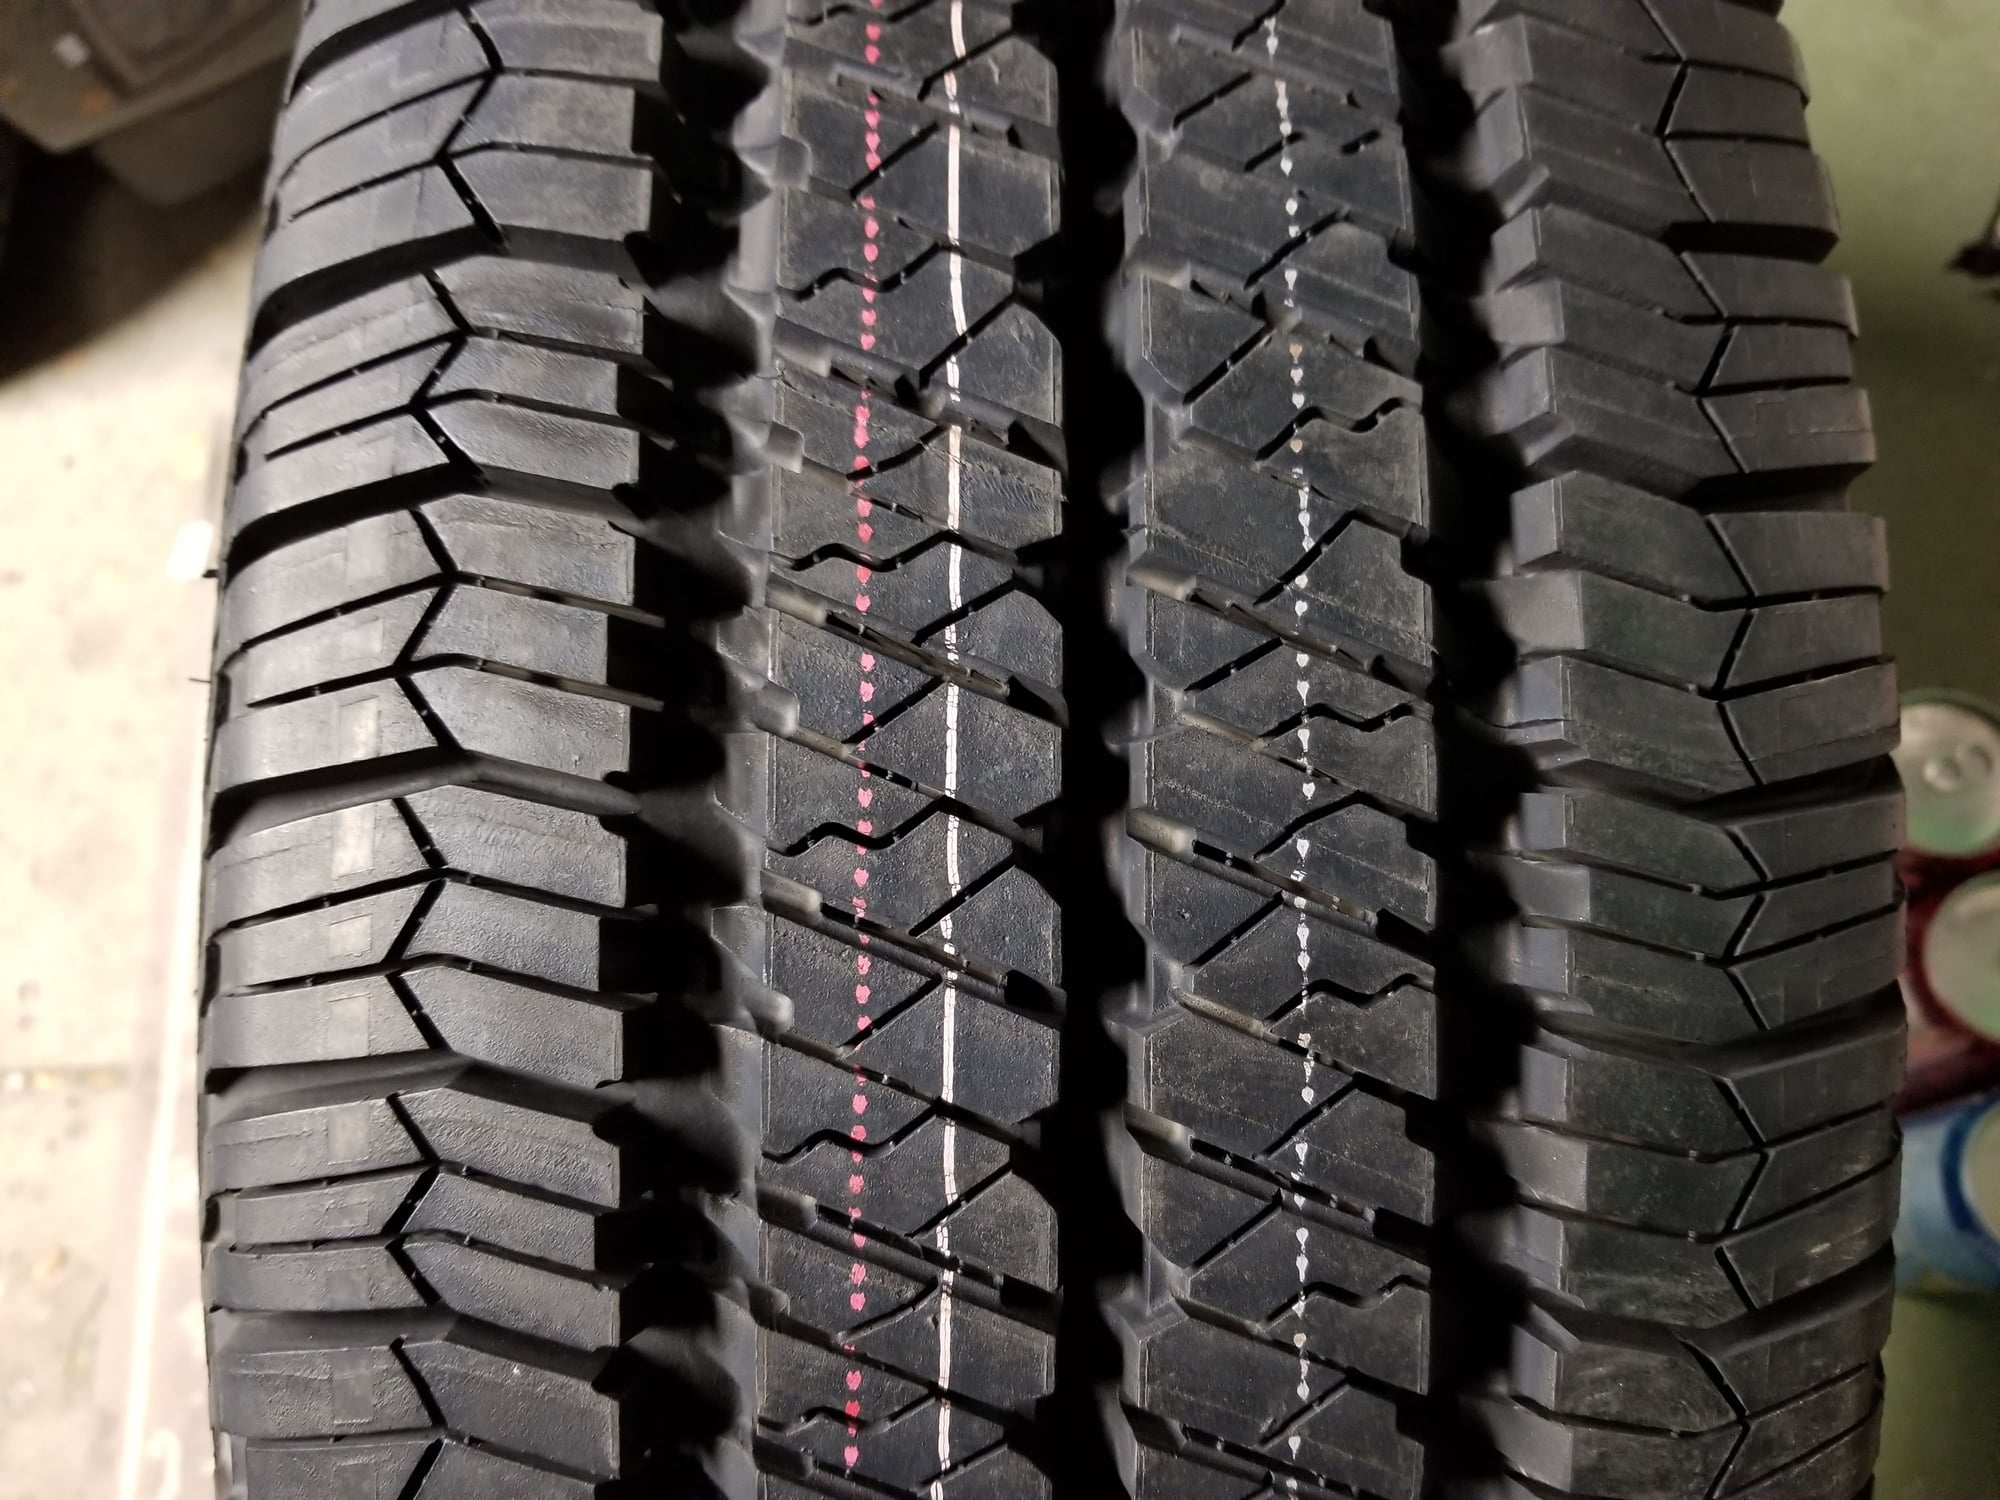 Wheels and Tires/Axles - FS - Goodyear Wrangler SR-A P255/75R17 tire - Used - Northville, MI 48167, United States